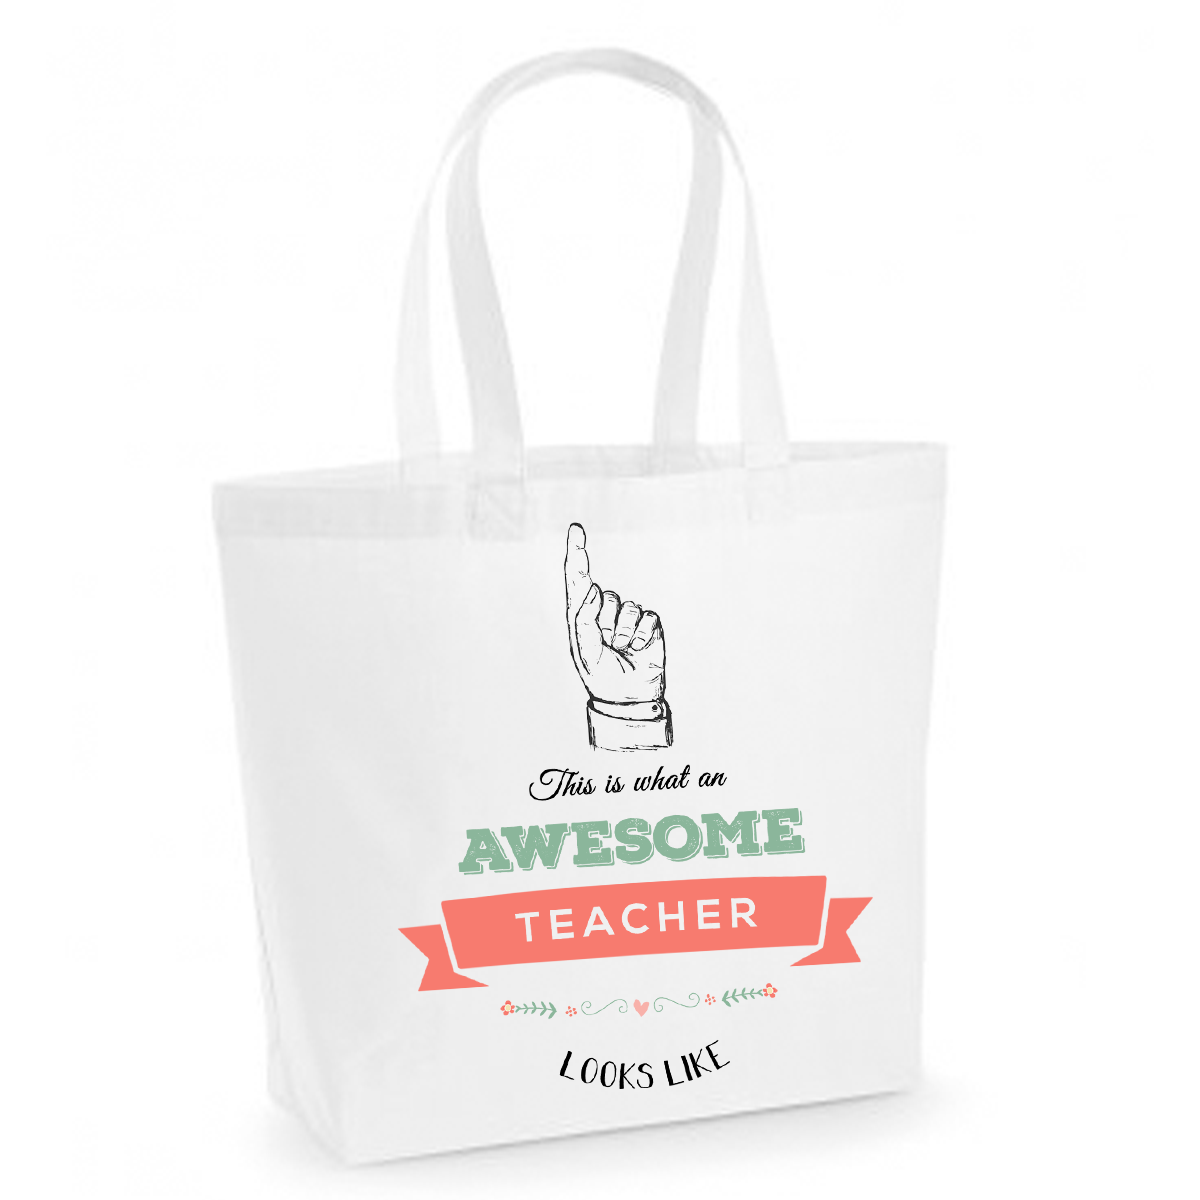 This is what an awesome teacher looks like - White Cotton Tote Bag